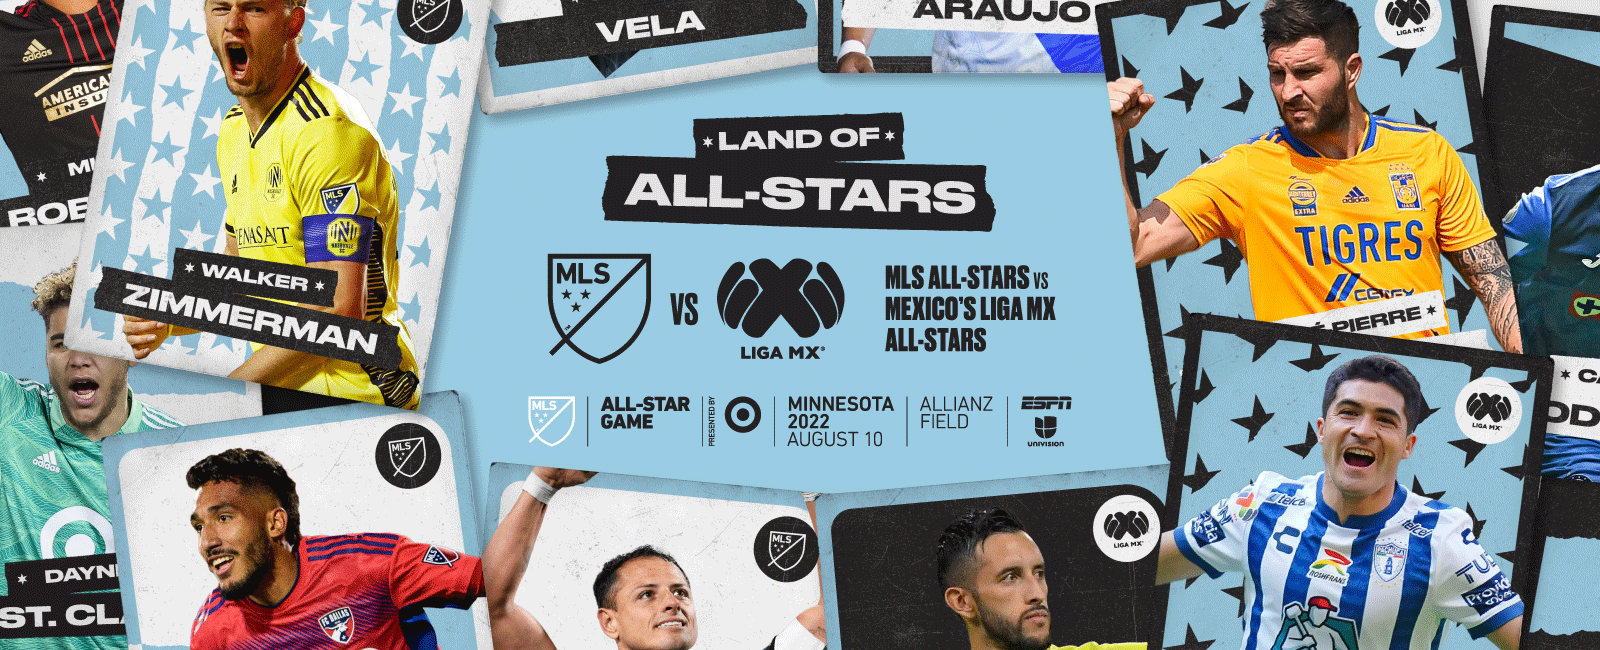 Voting now open for 2022 MLS All-Star Game